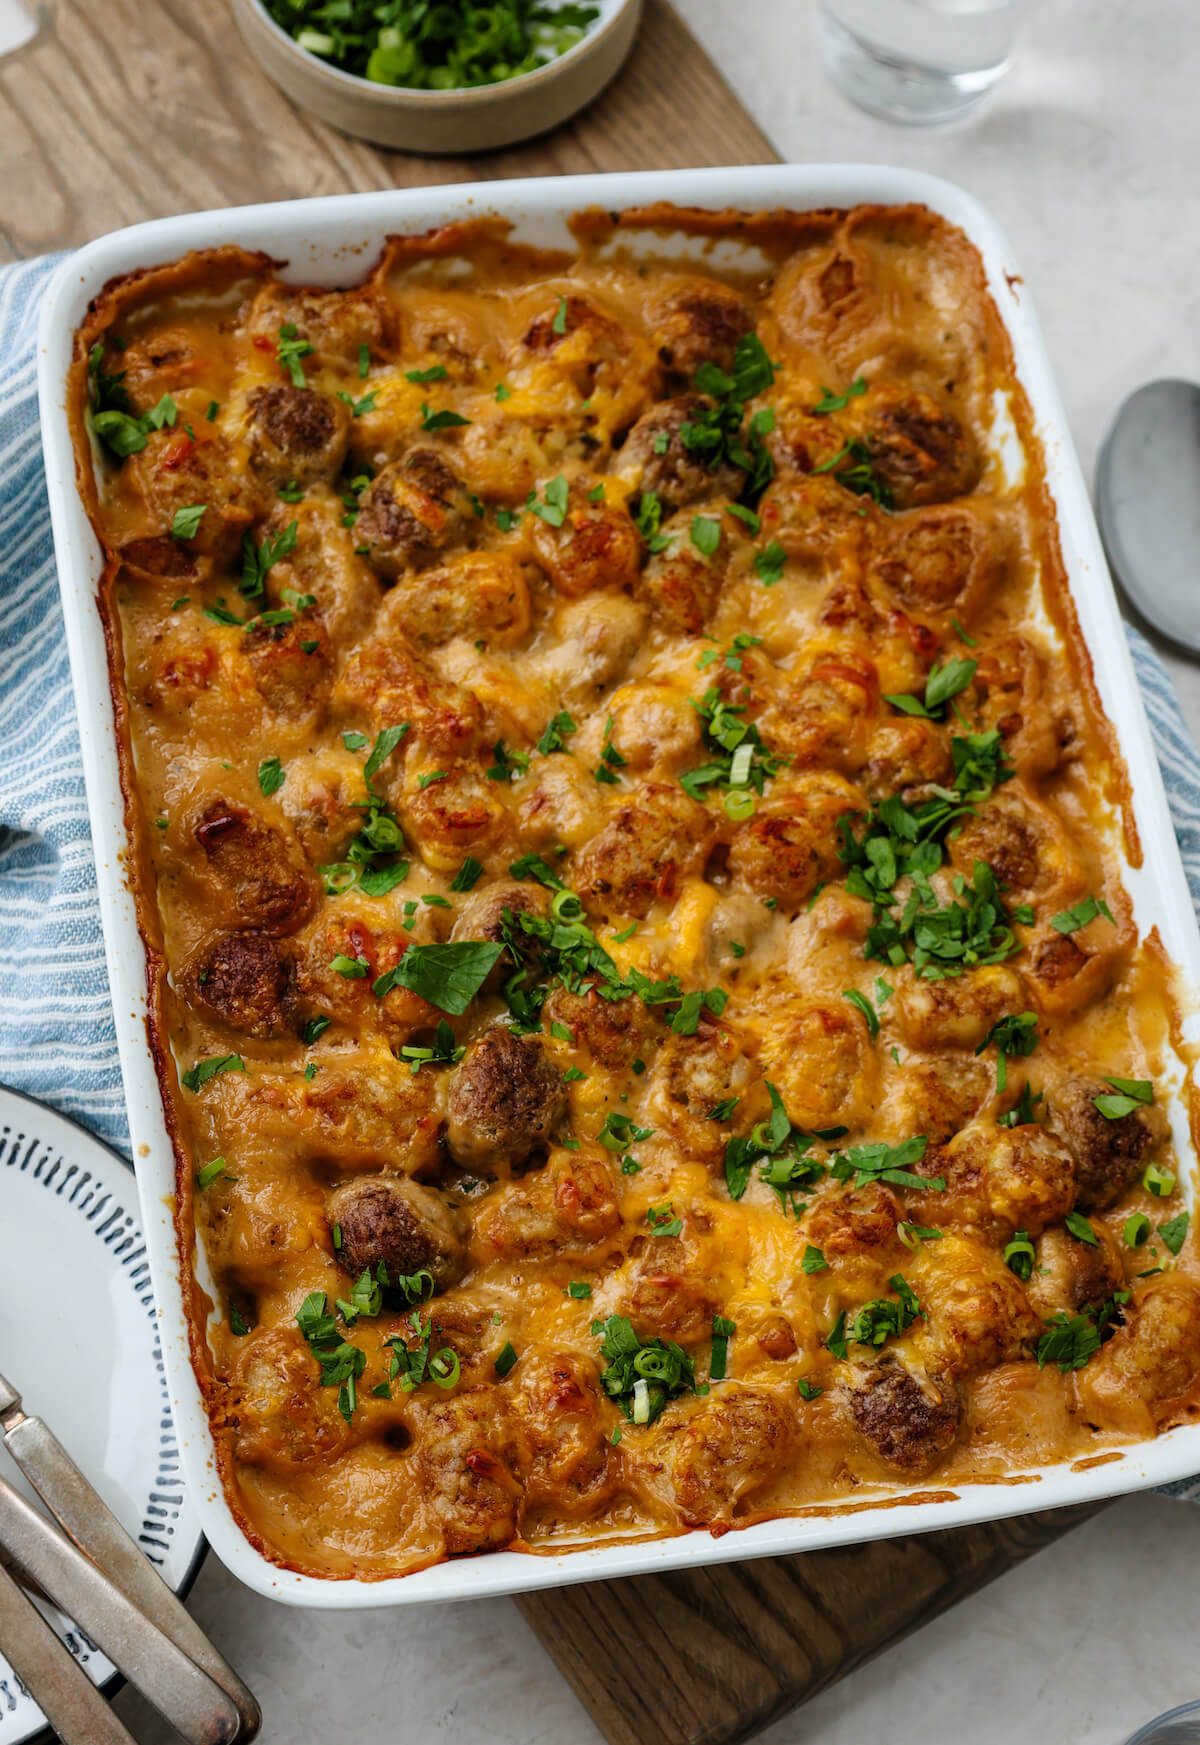 A full pan of cheesy meatball casserole with tater tots baked in a cream sauce.